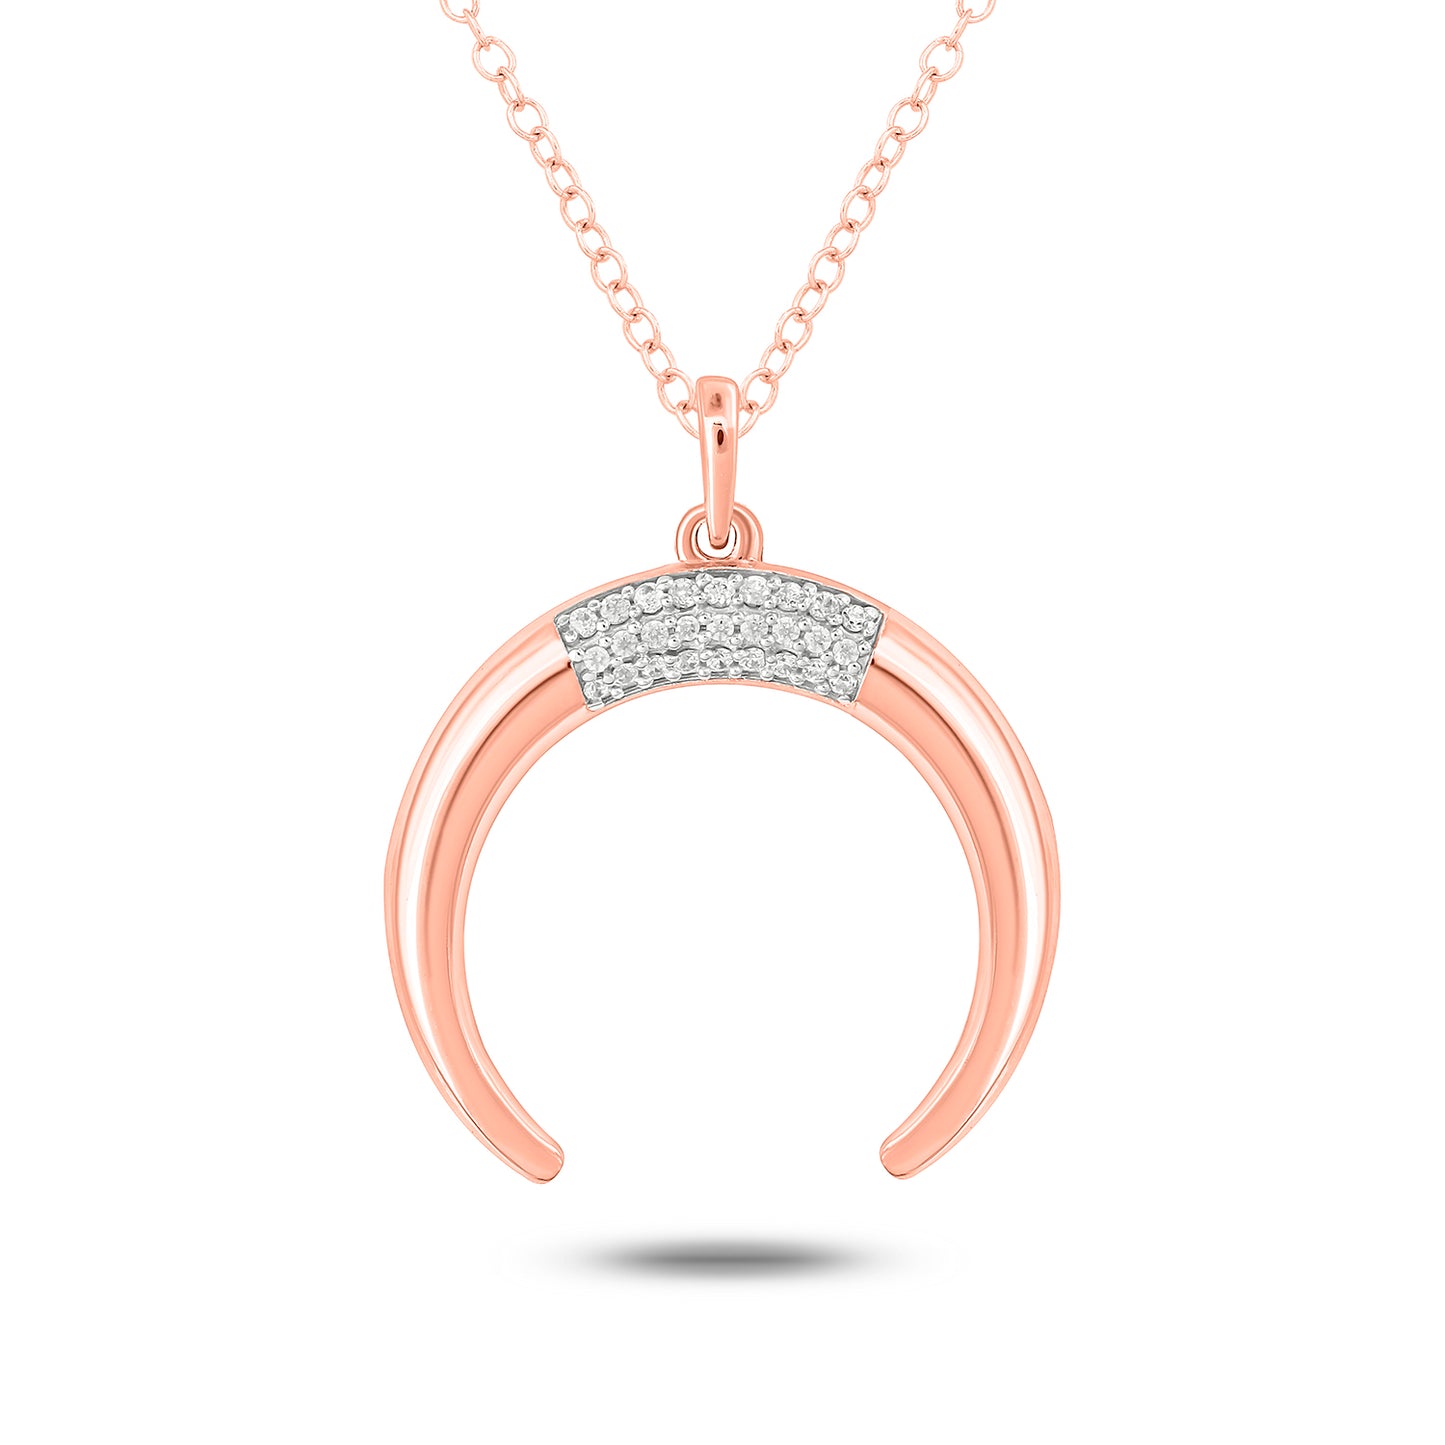 Crescent Moon Diamond Pendant Necklace in 925 Sterling Silver